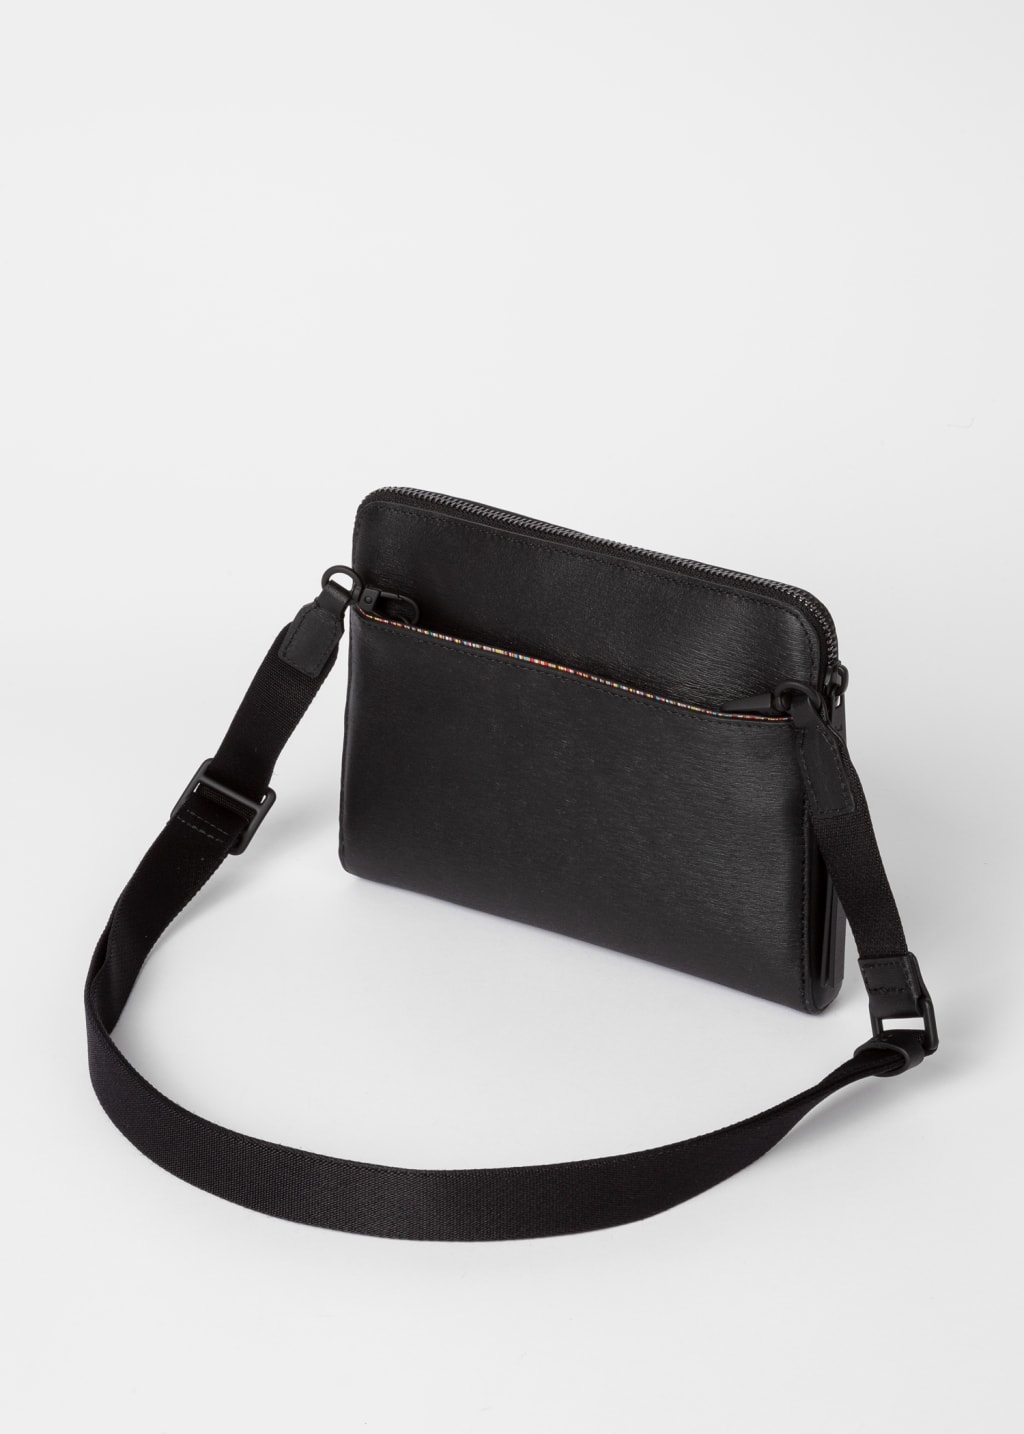 Detail View - Black Embossed Leather Musette Bag Paul Smith